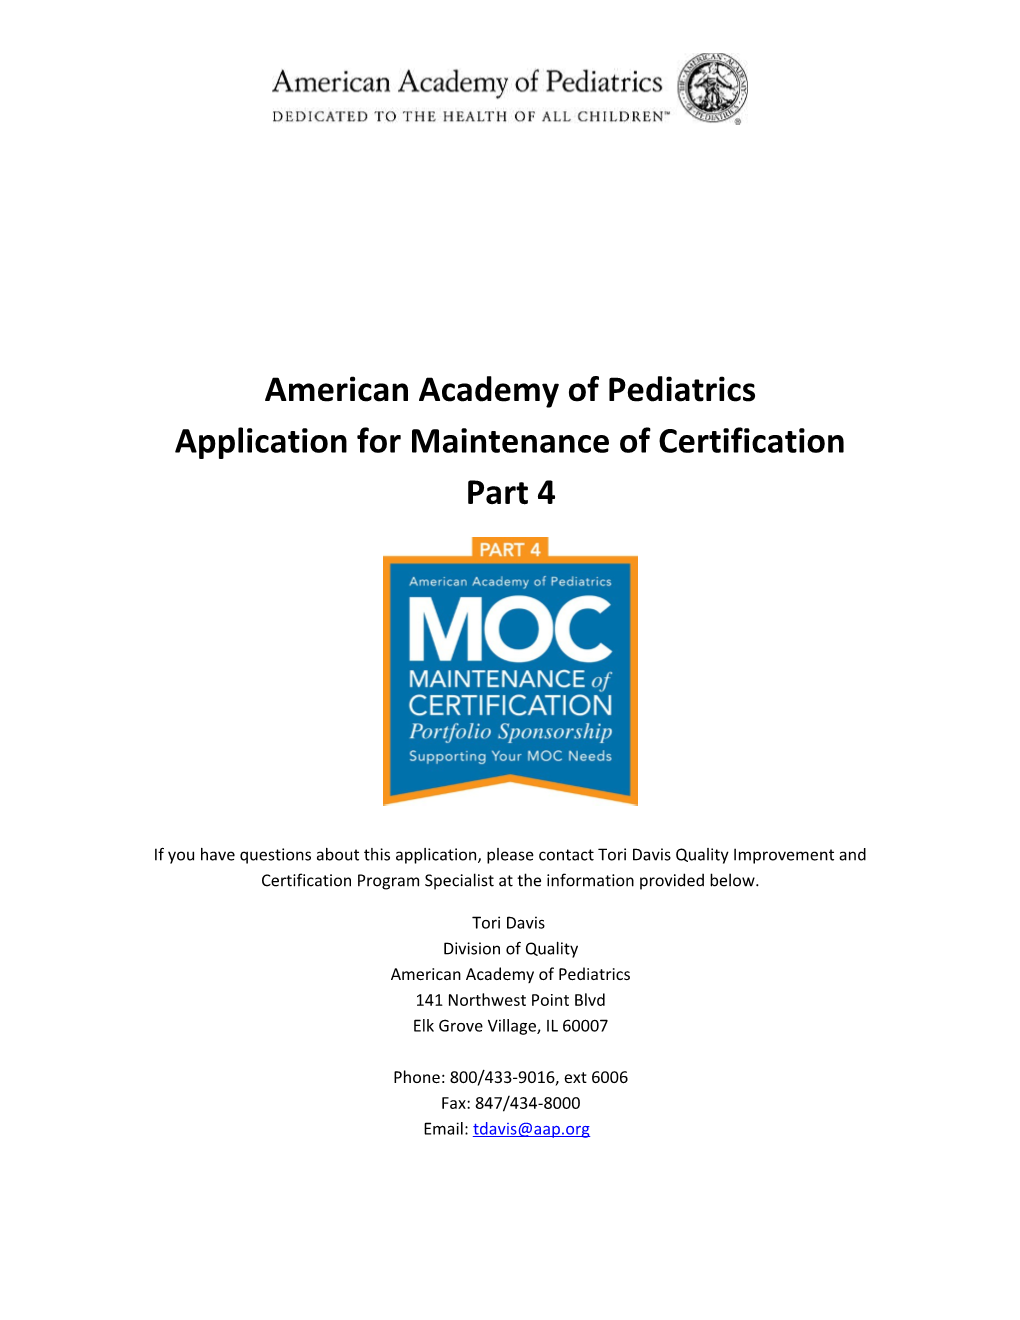 American Academy of Pediatrics Application for Maintenance of Certification Part 4